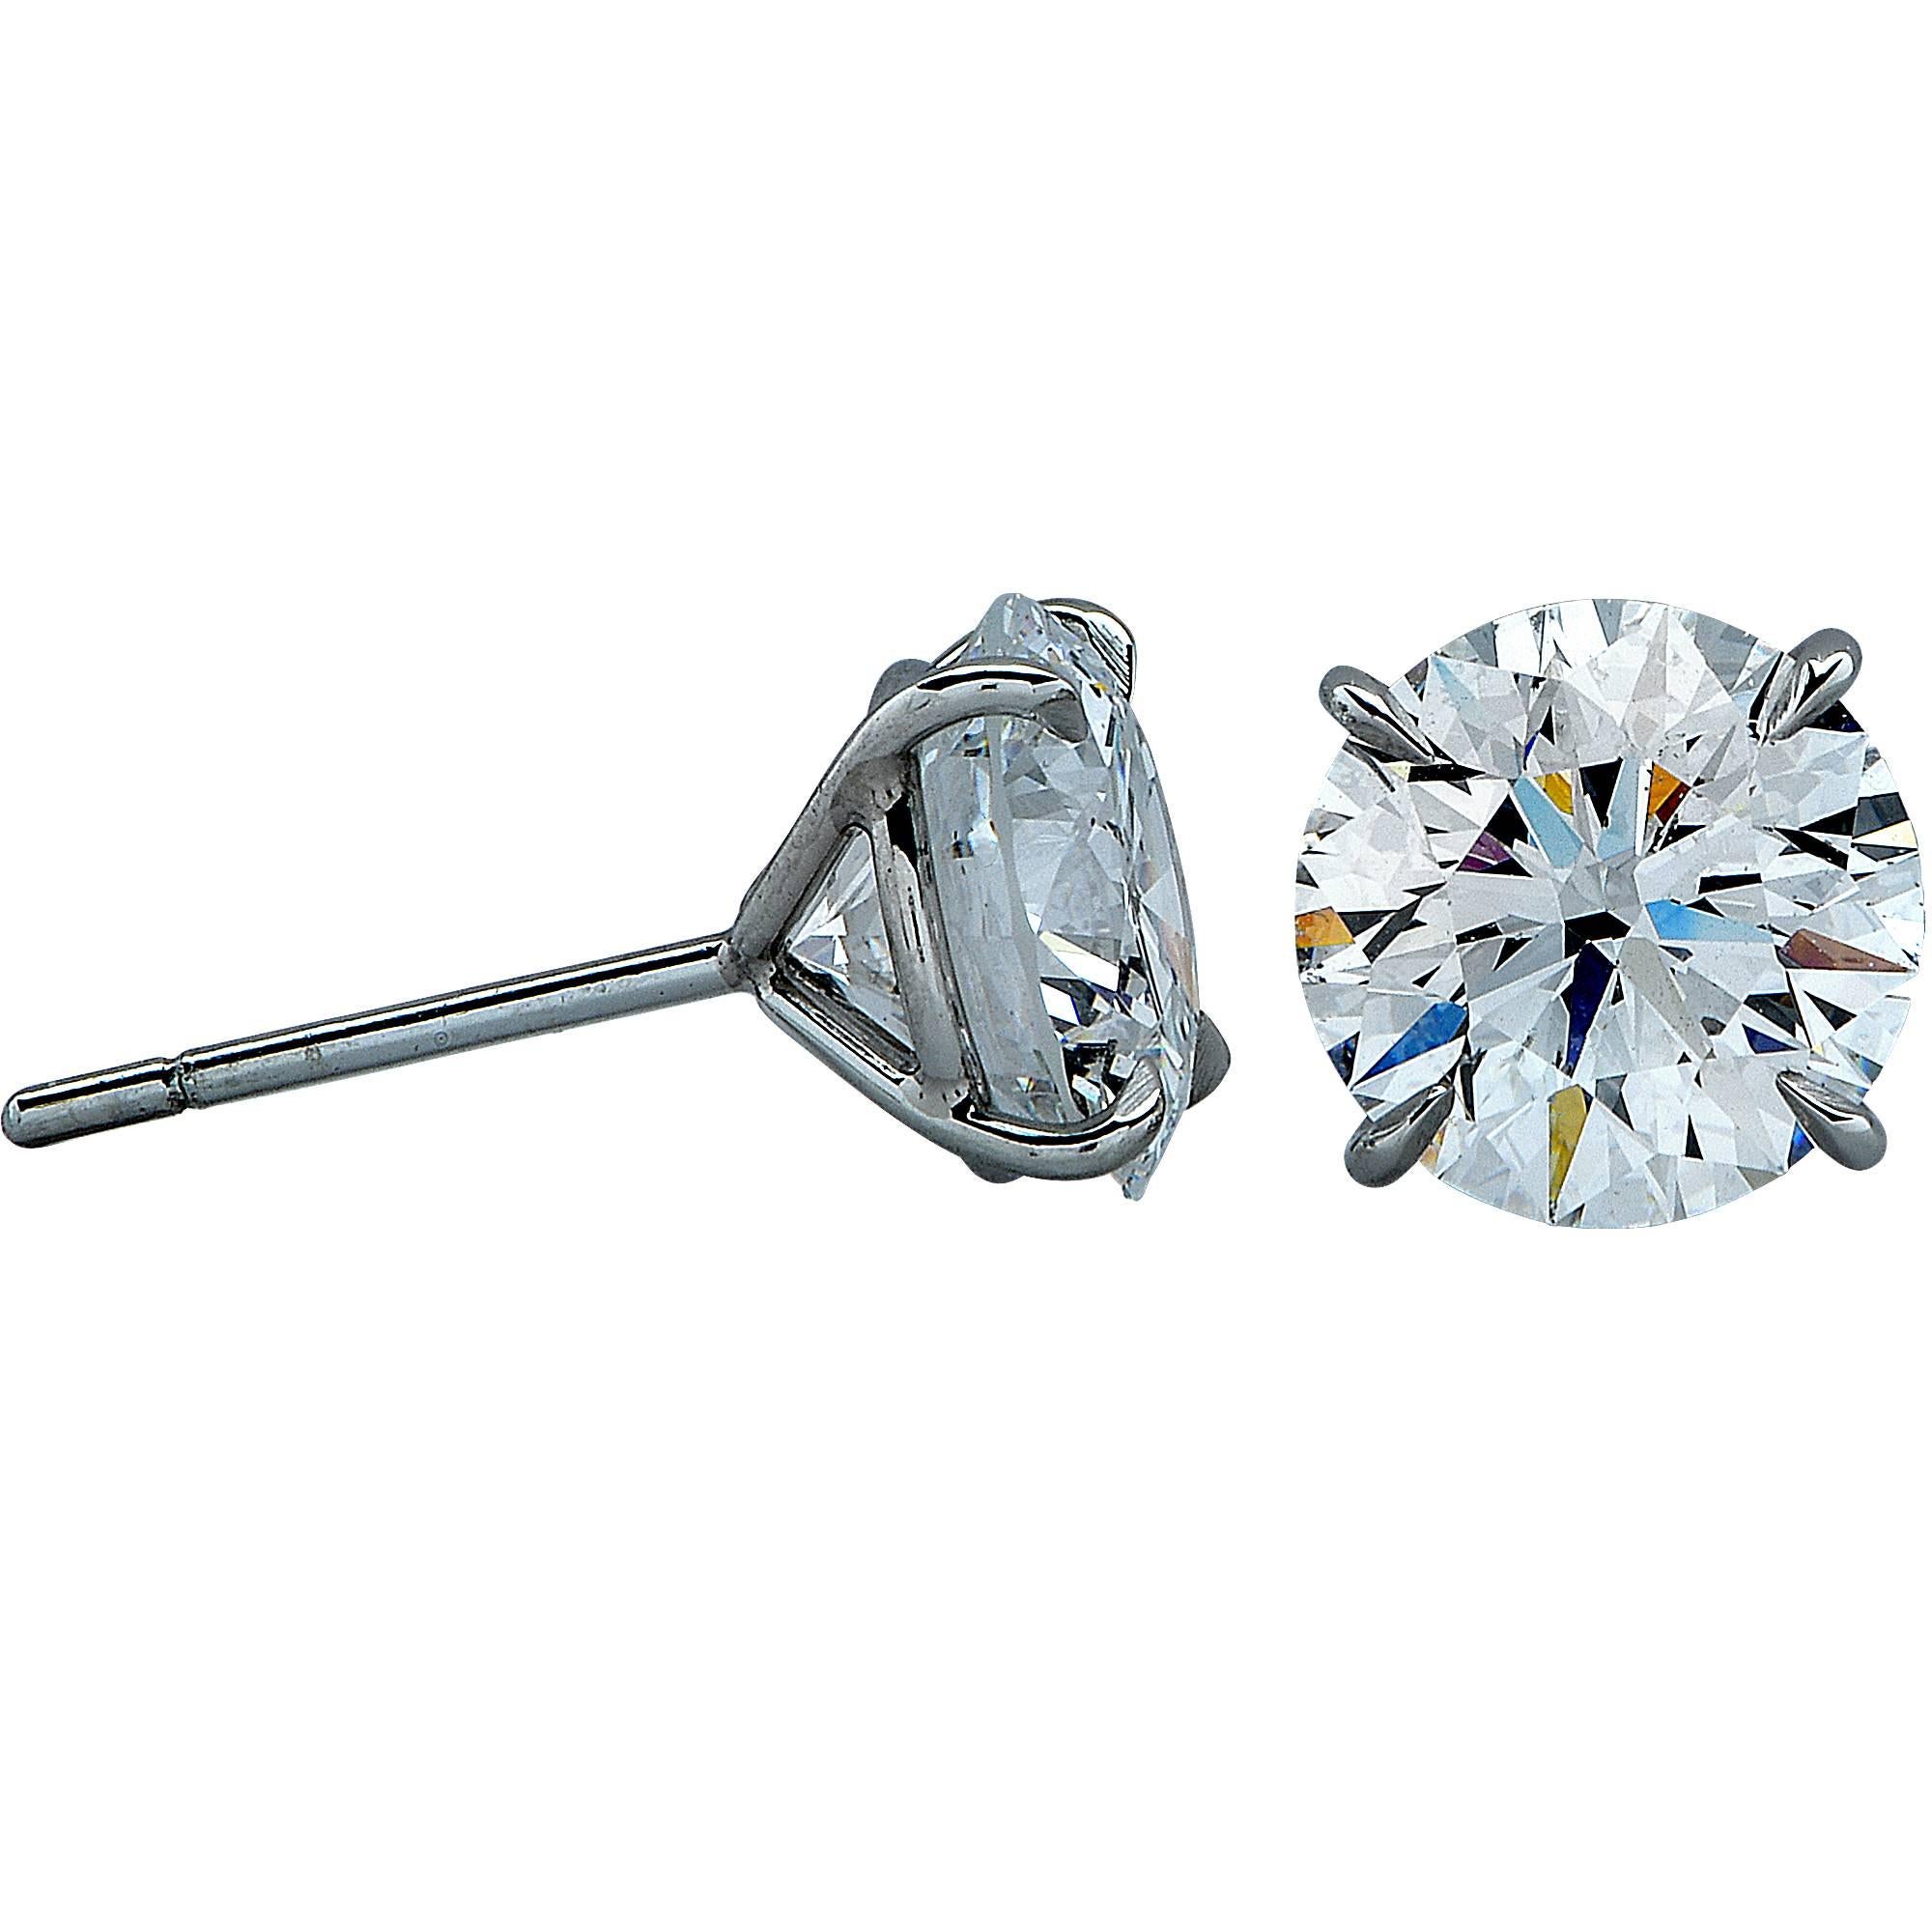 Platinum handmade stud earrings featuring 2 round brilliant cut diamonds weighing 5.13cts total, E color SI2 clarity, one diamond AGS and one GIA certified. Both diamond are excellent cut, symmetry and polish.

Measurements are available upon